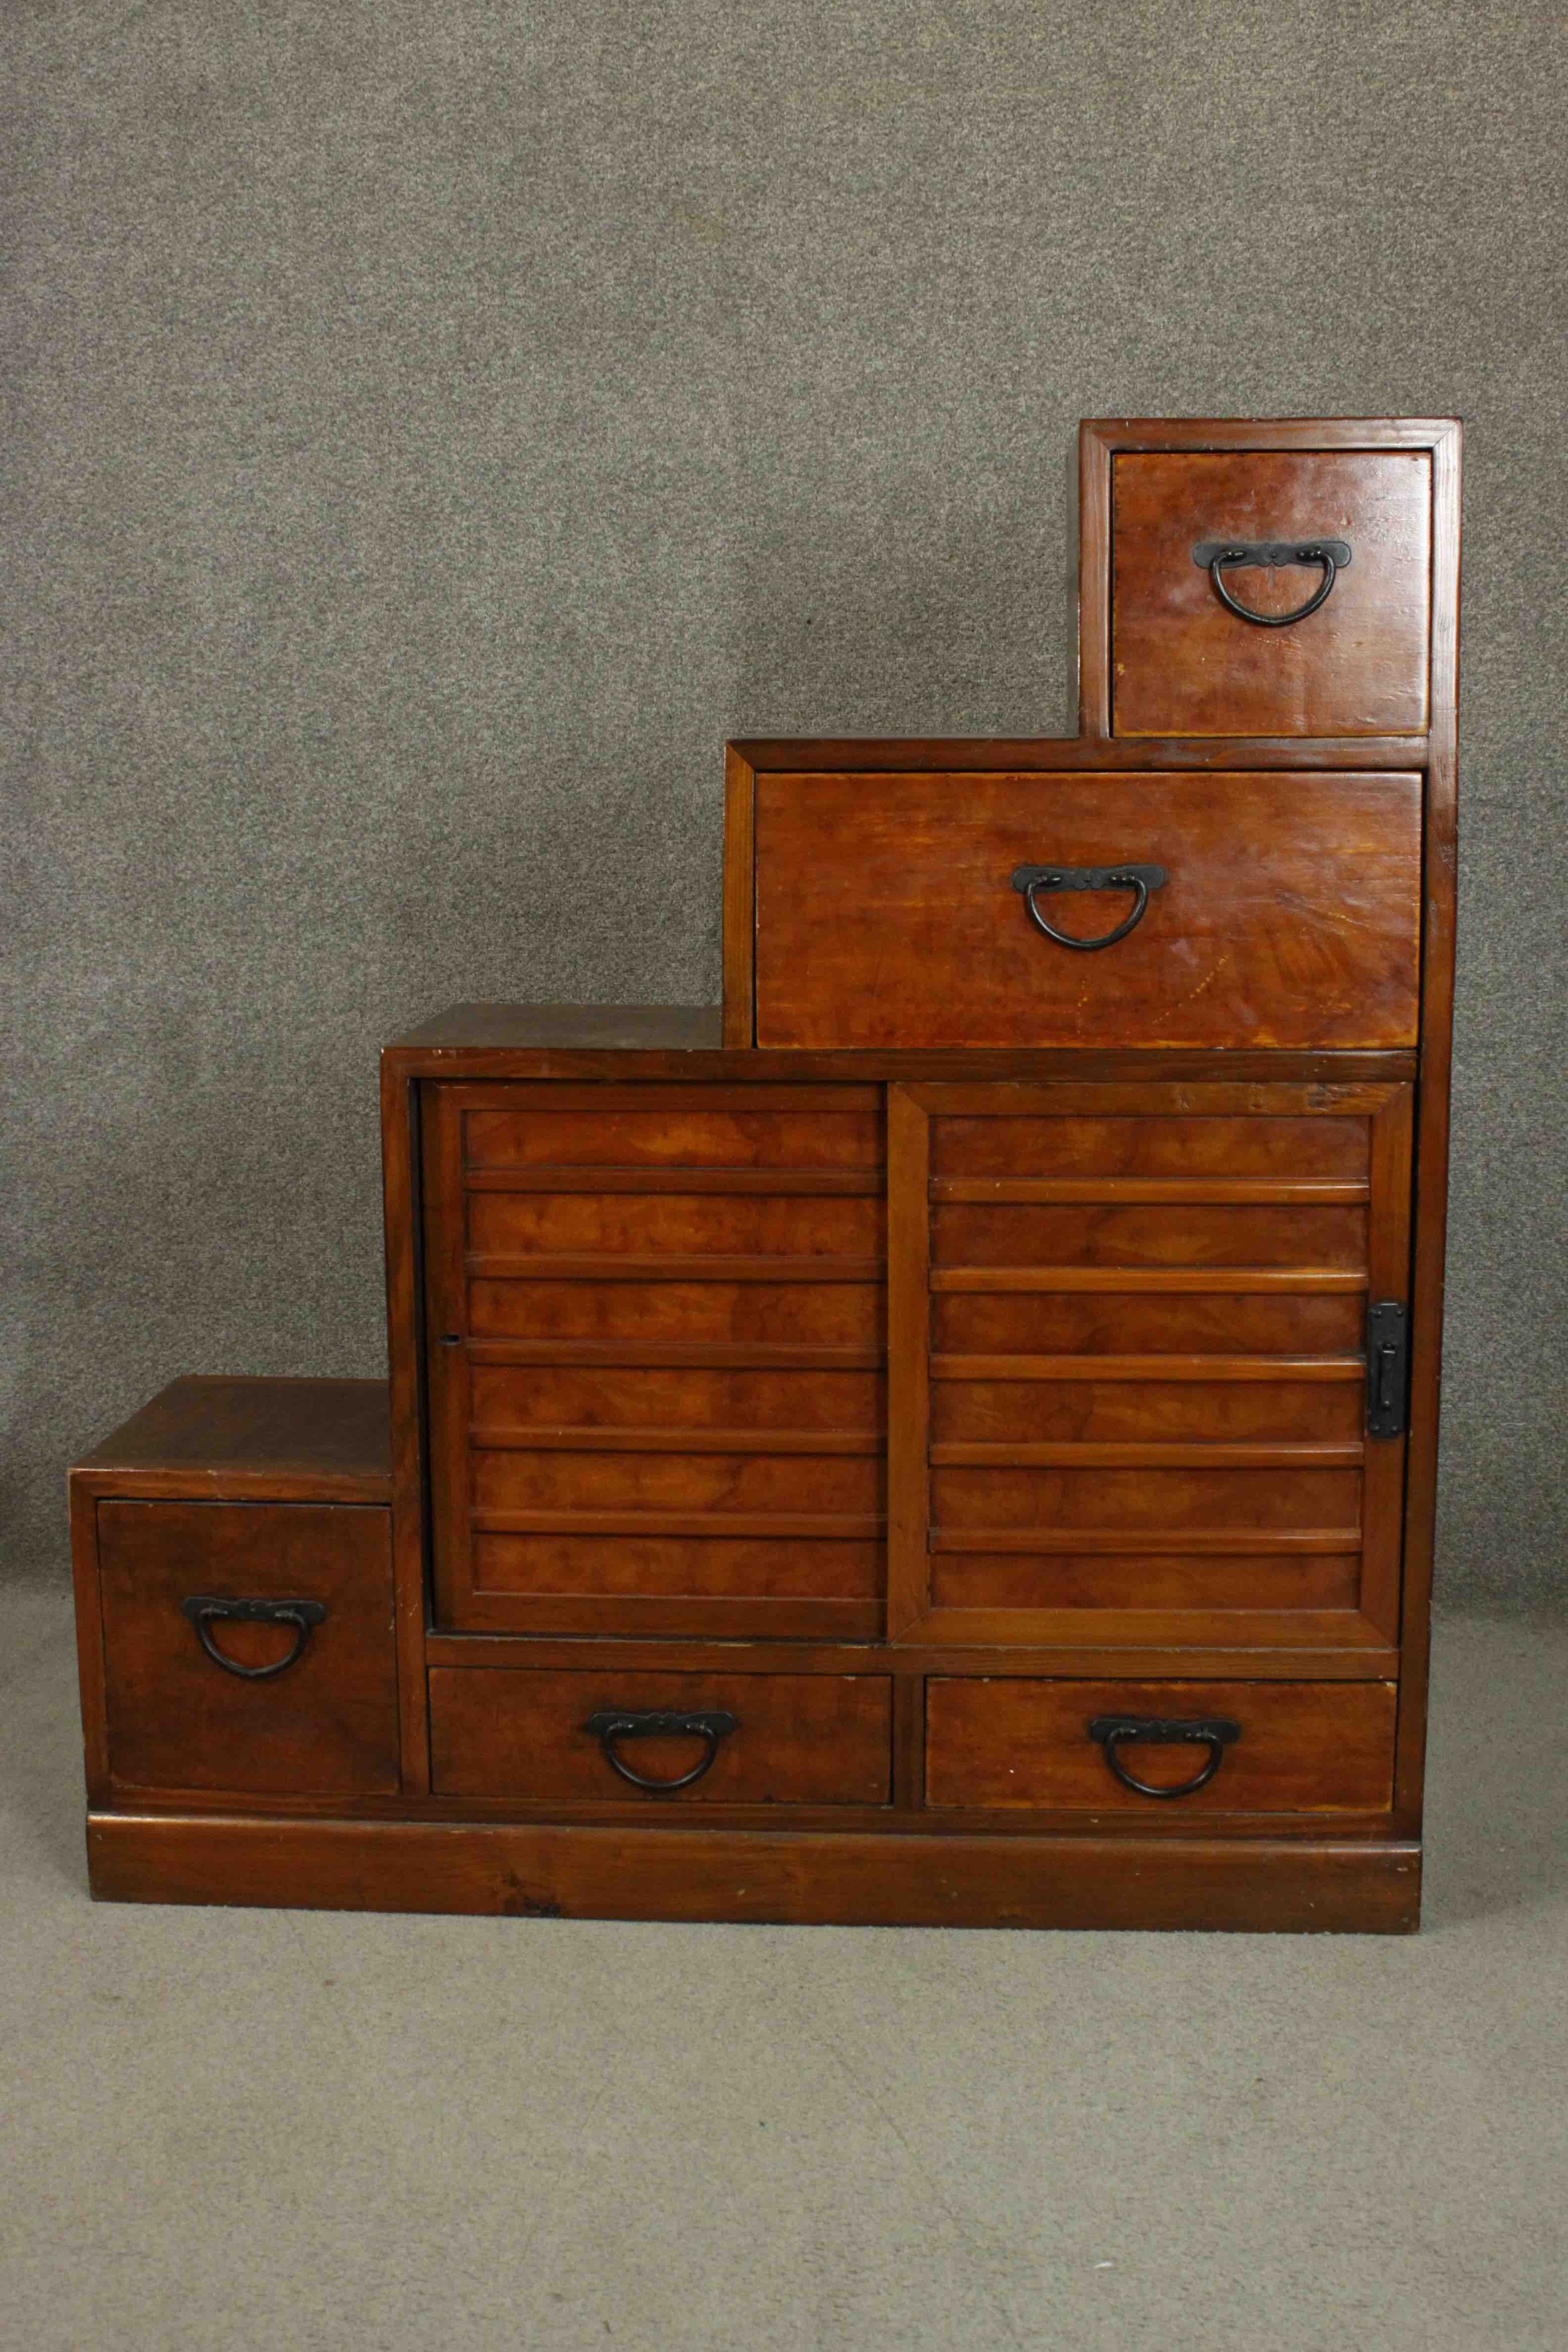 A stepped Japanese Tanshu hardwood chest, with an arrangement of five drawers.